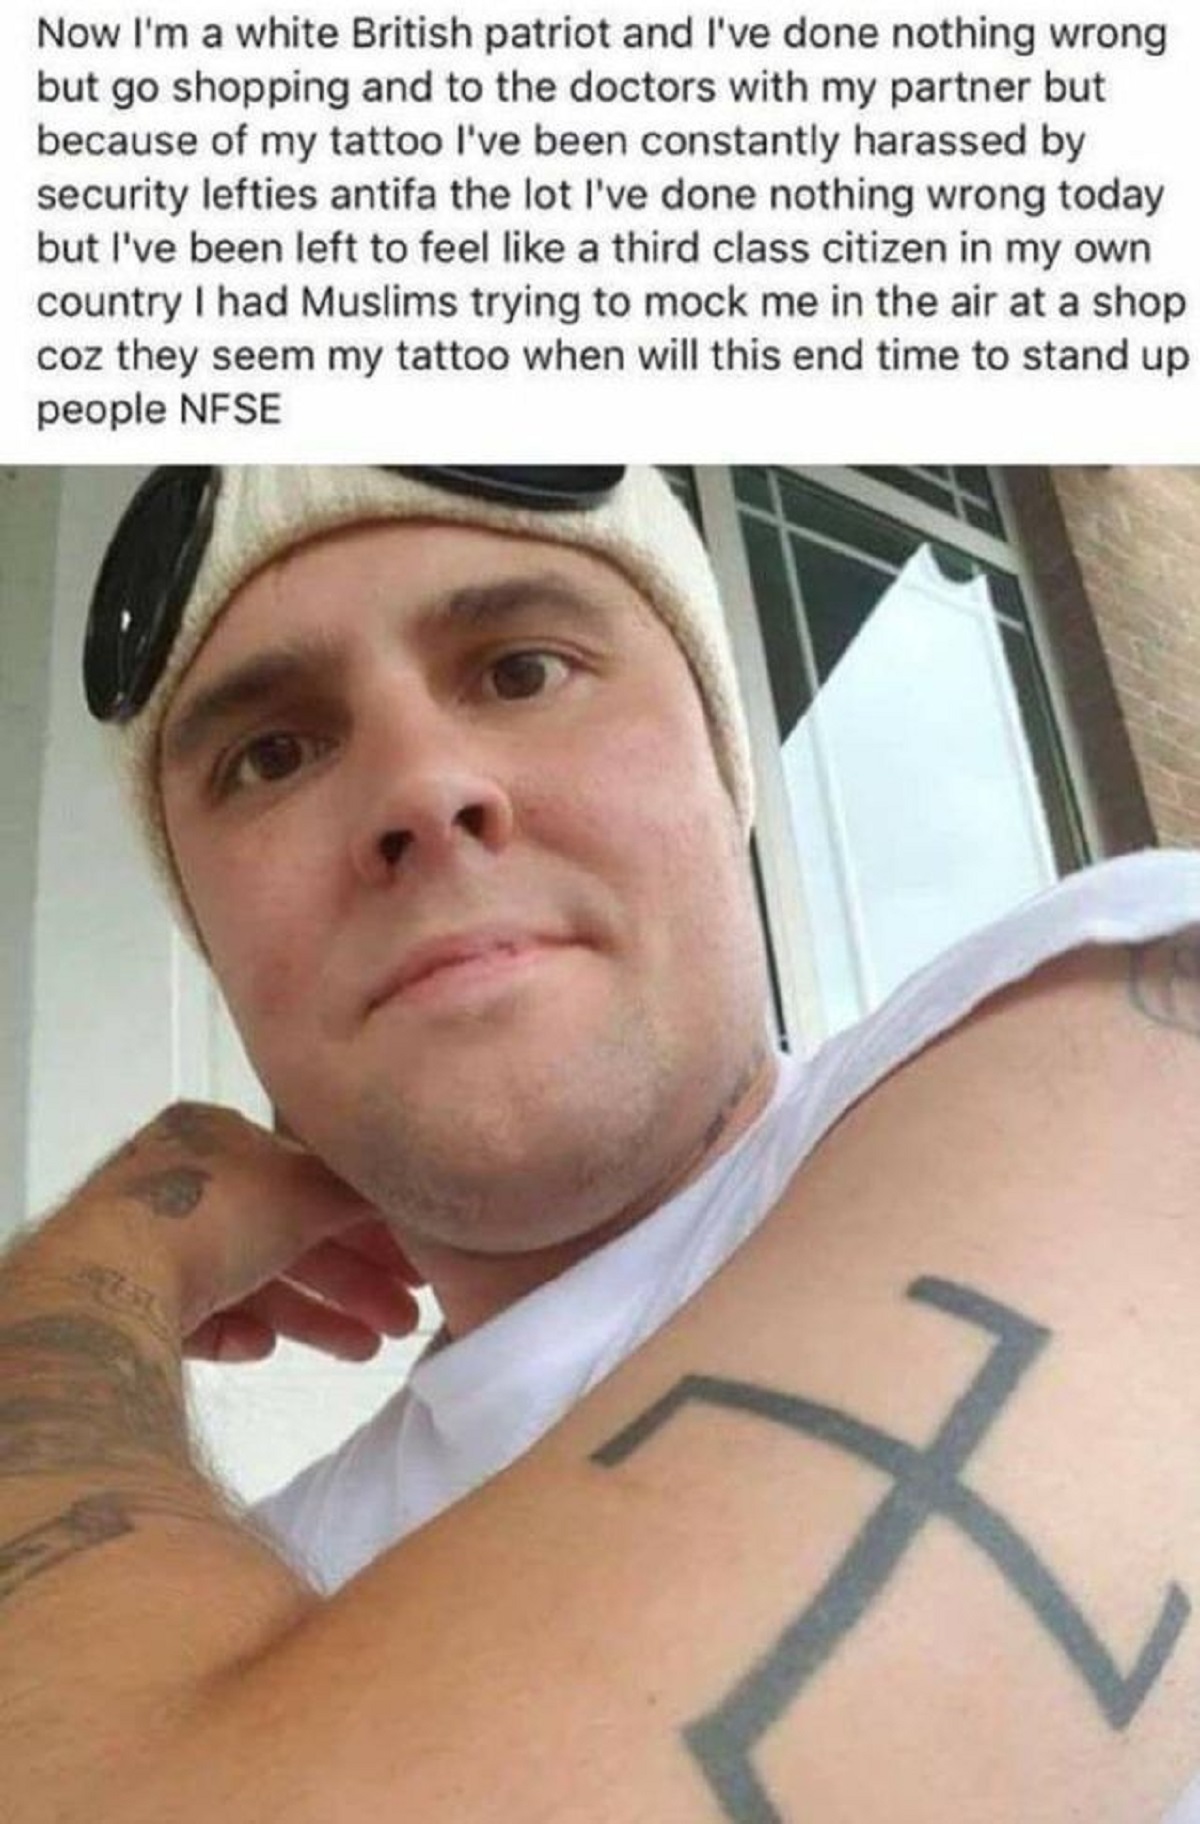 cringe pics - selfie - Now I'm a white British patriot and I've done nothing wrong but go shopping and to the doctors with my partner but because of my tattoo I've been constantly harassed by security lefties antifa the lot I've done nothing wrong today b